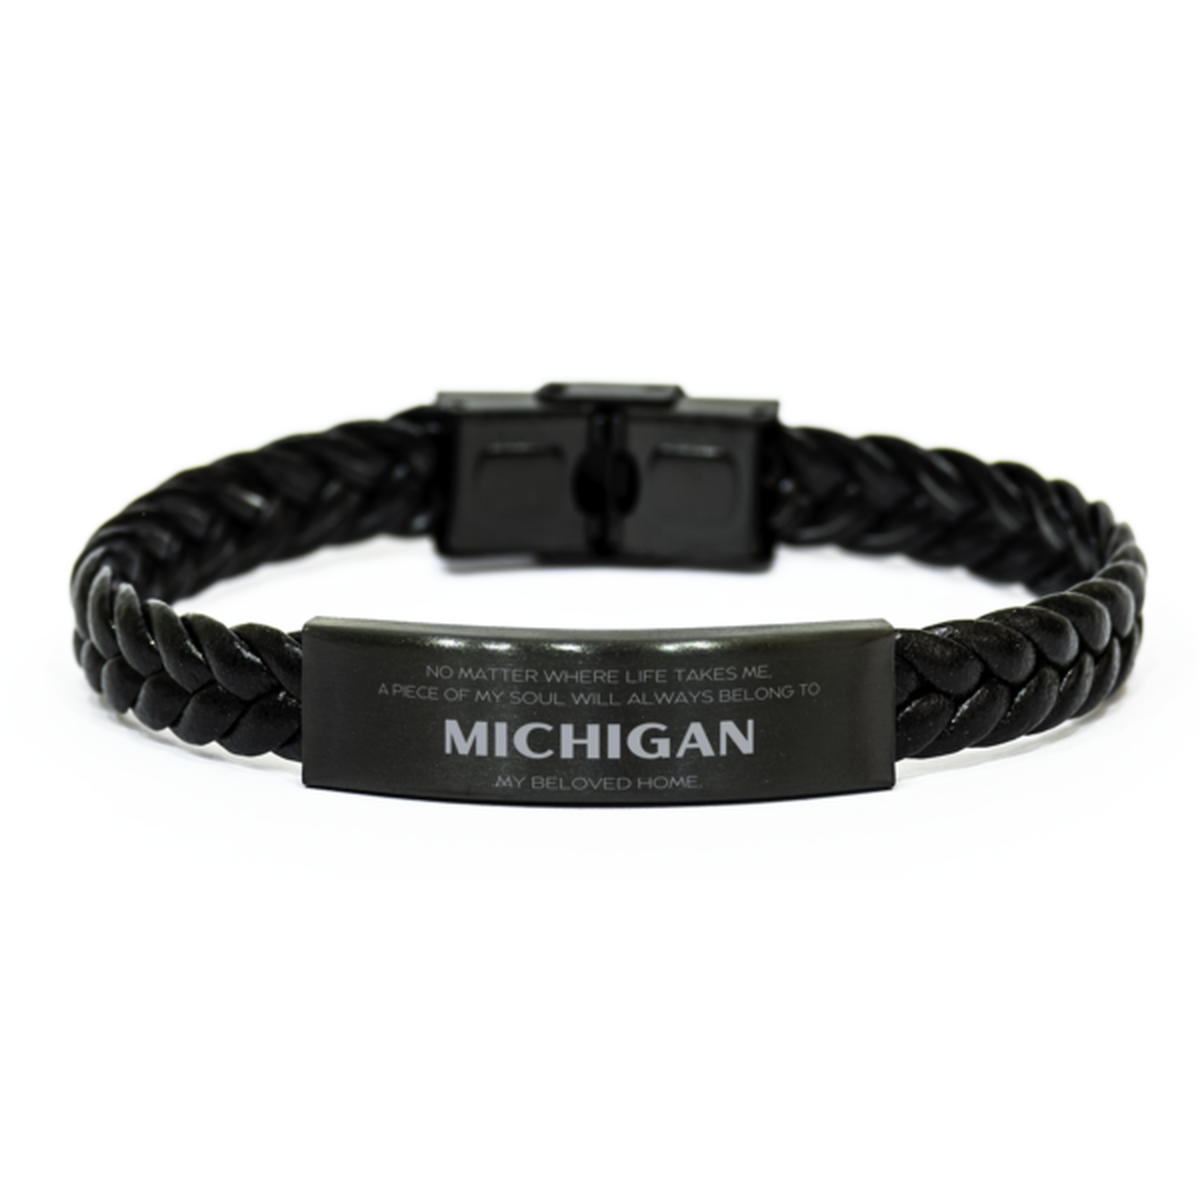 Love Michigan State Gifts, My soul will always belong to Michigan, Proud Braided Leather Bracelet, Birthday Unique Gifts For Michigan Men, Women, Friends